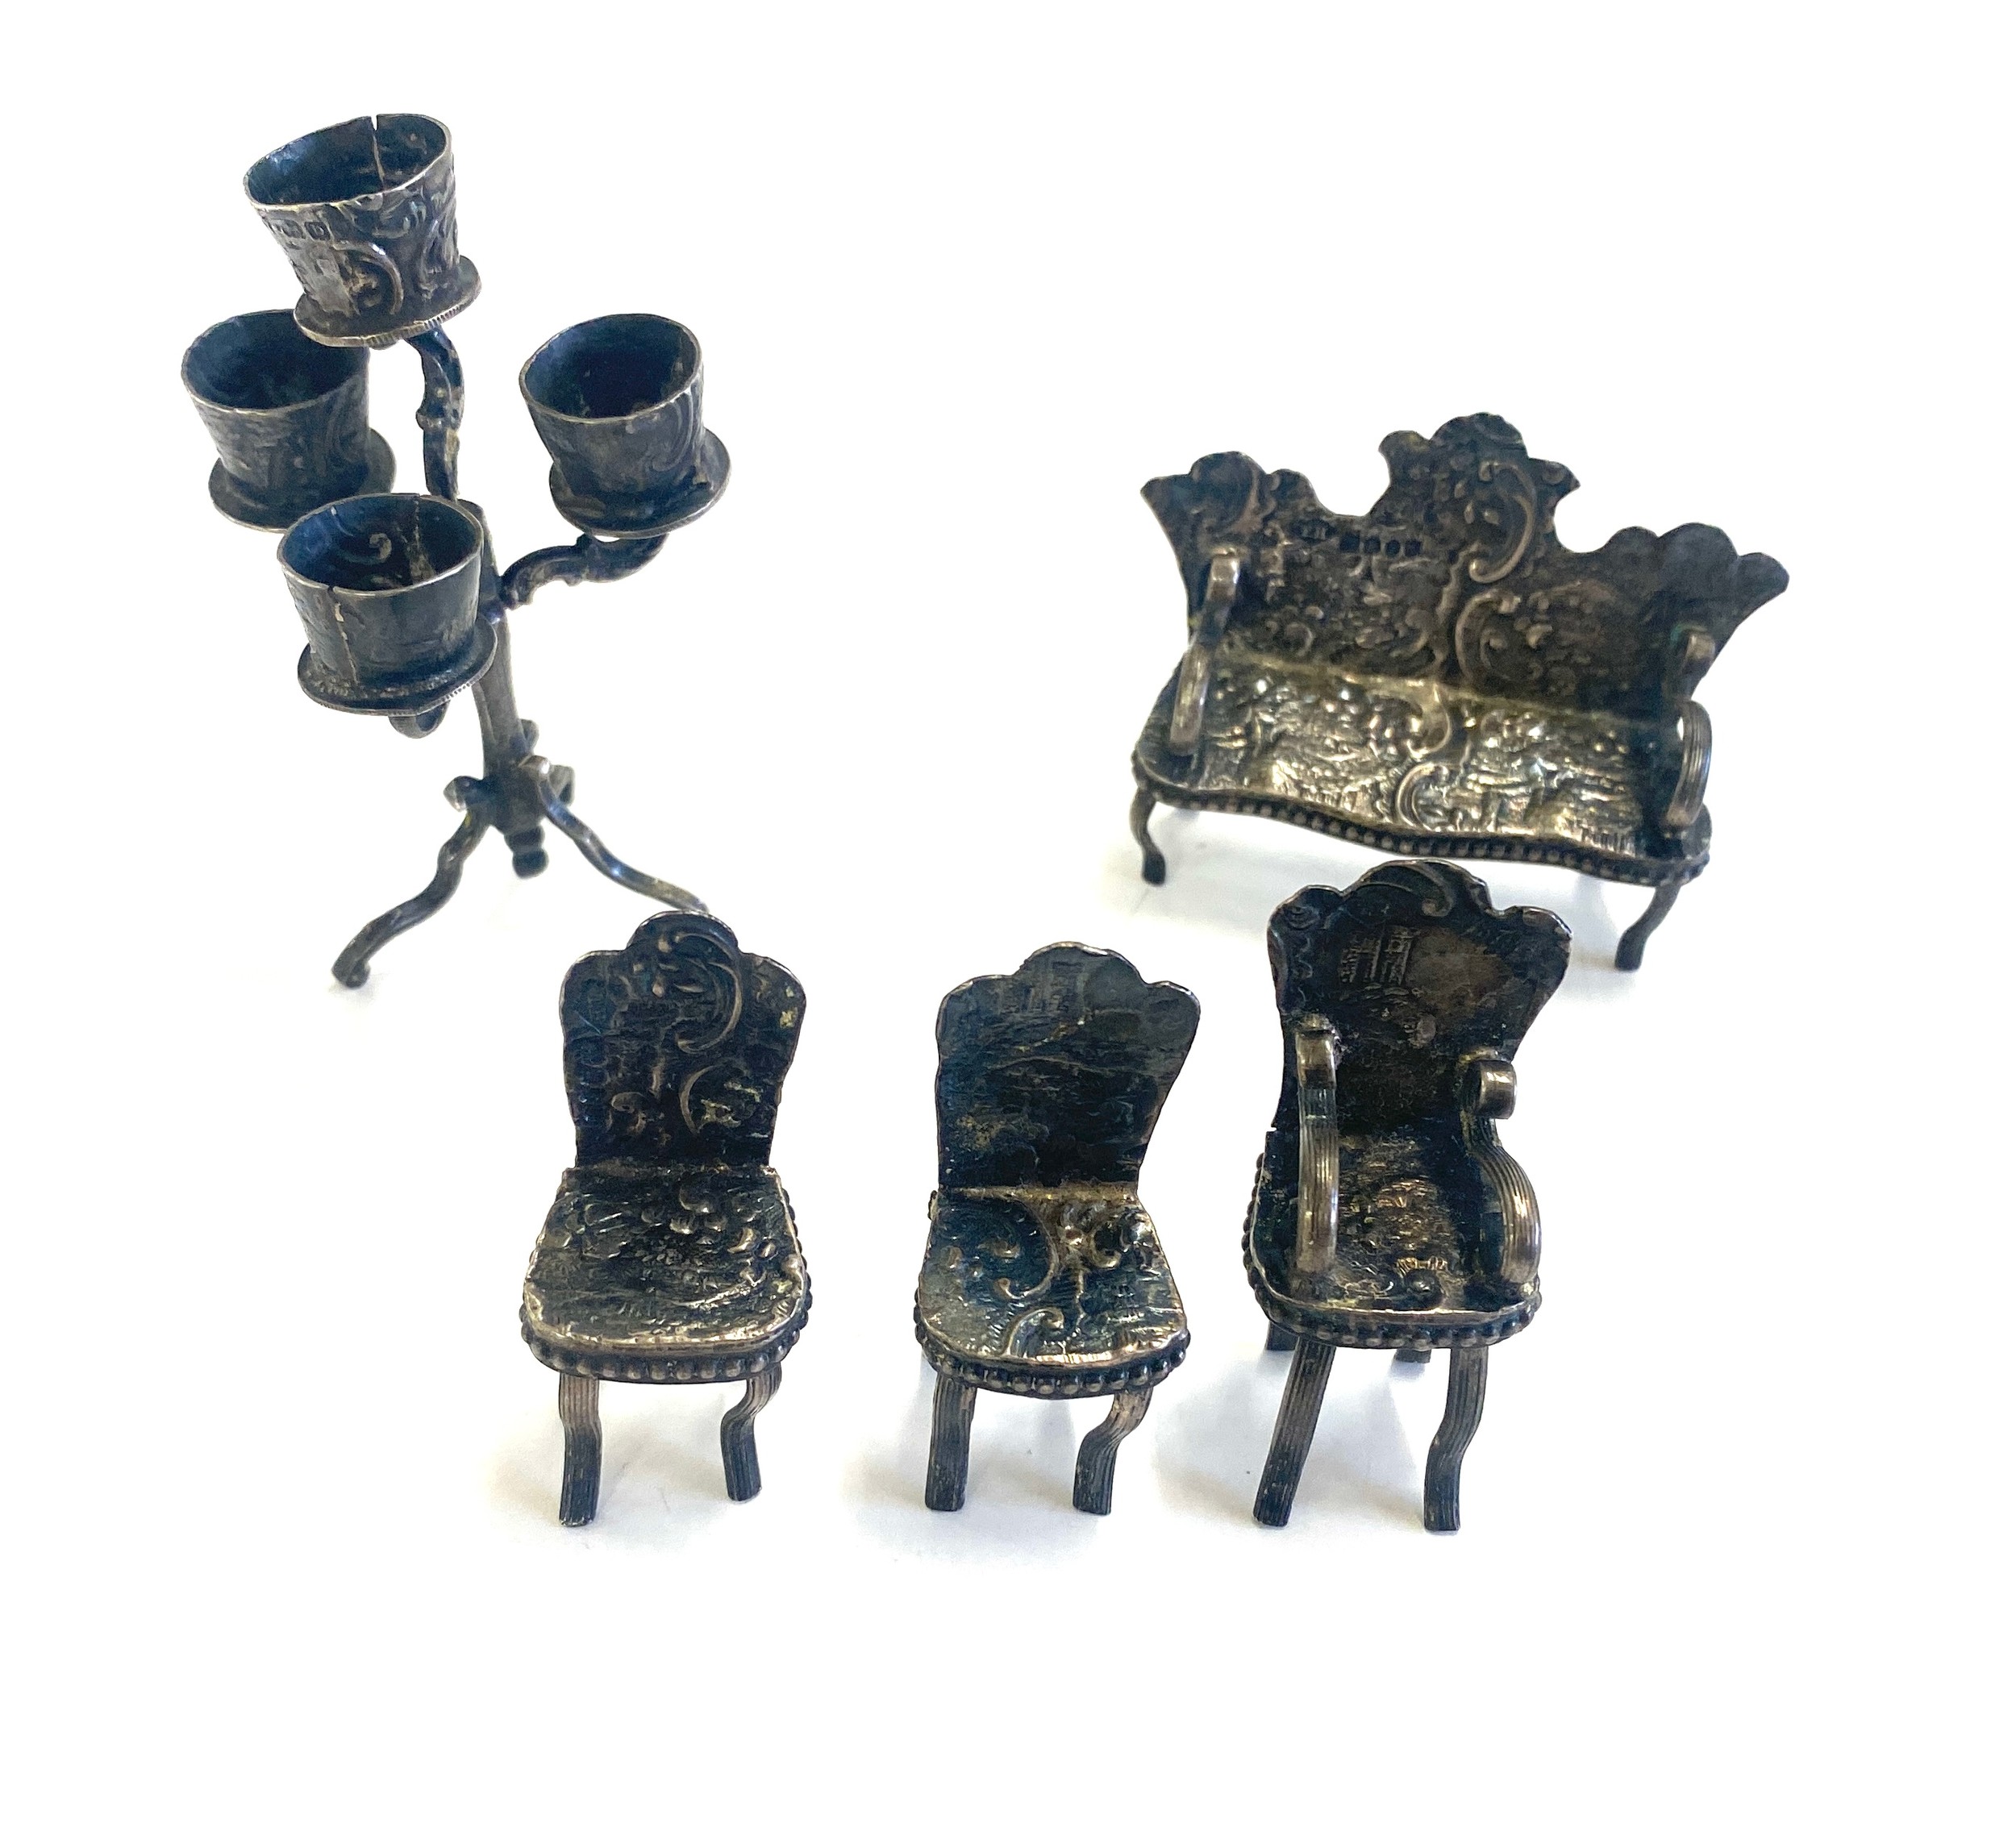 5 Pieces of hallmarked antique silver dolls house miniatures by Theodore Hartmann, London silver